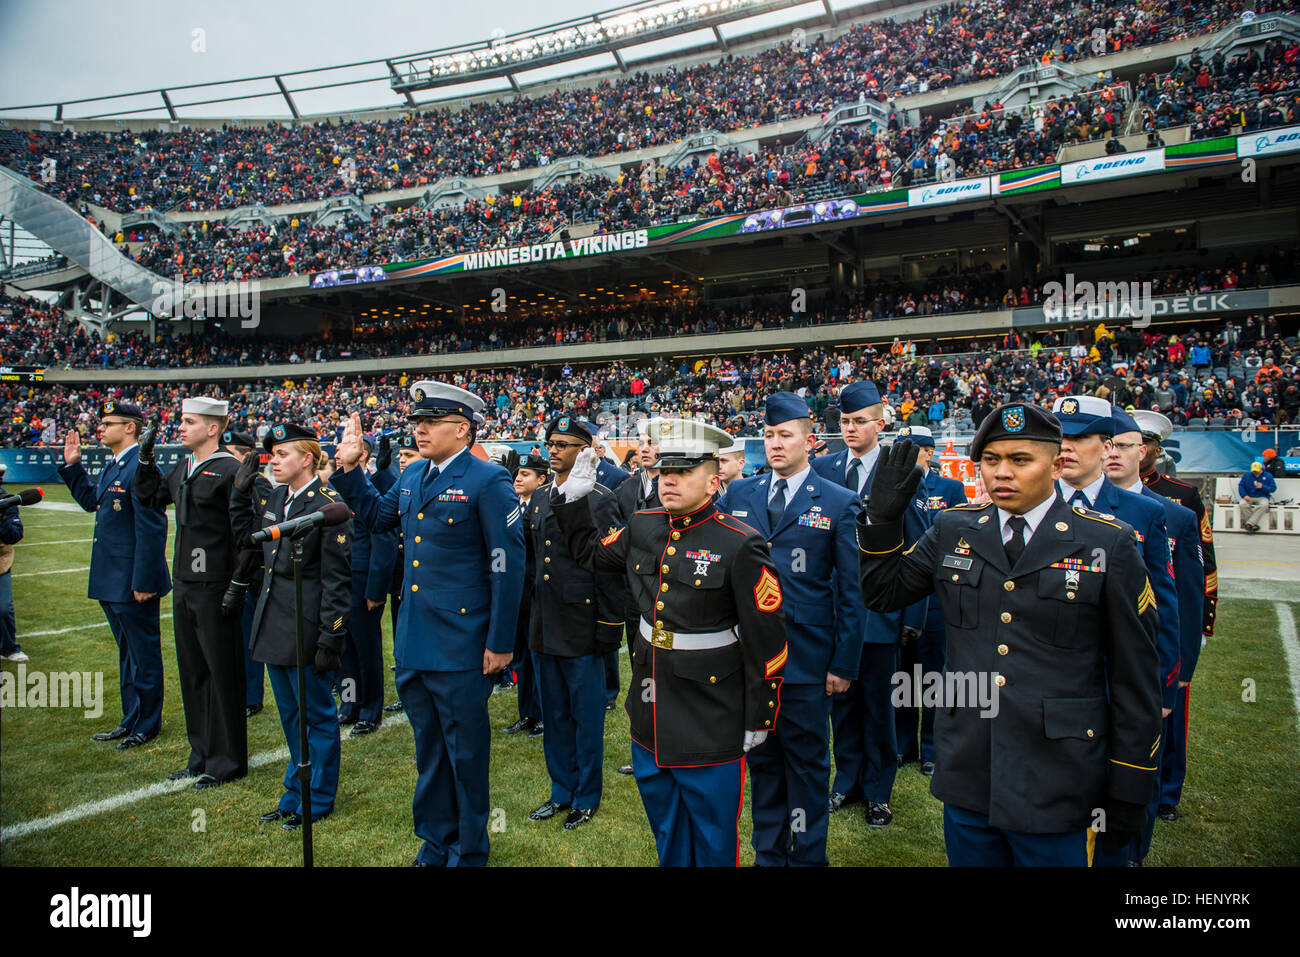 A group of service members recite the oath of enlistment during a reenlistment ceremony at Soldier Field during an NFL game designated to honor troops, Nov. 16., a few days after Veterans Day. (U.S. Army photo by Sgt. 1st Class Michel Sauret) Military service members honored during Chicago Bears game 141116-A-TI382-723 Stock Photo